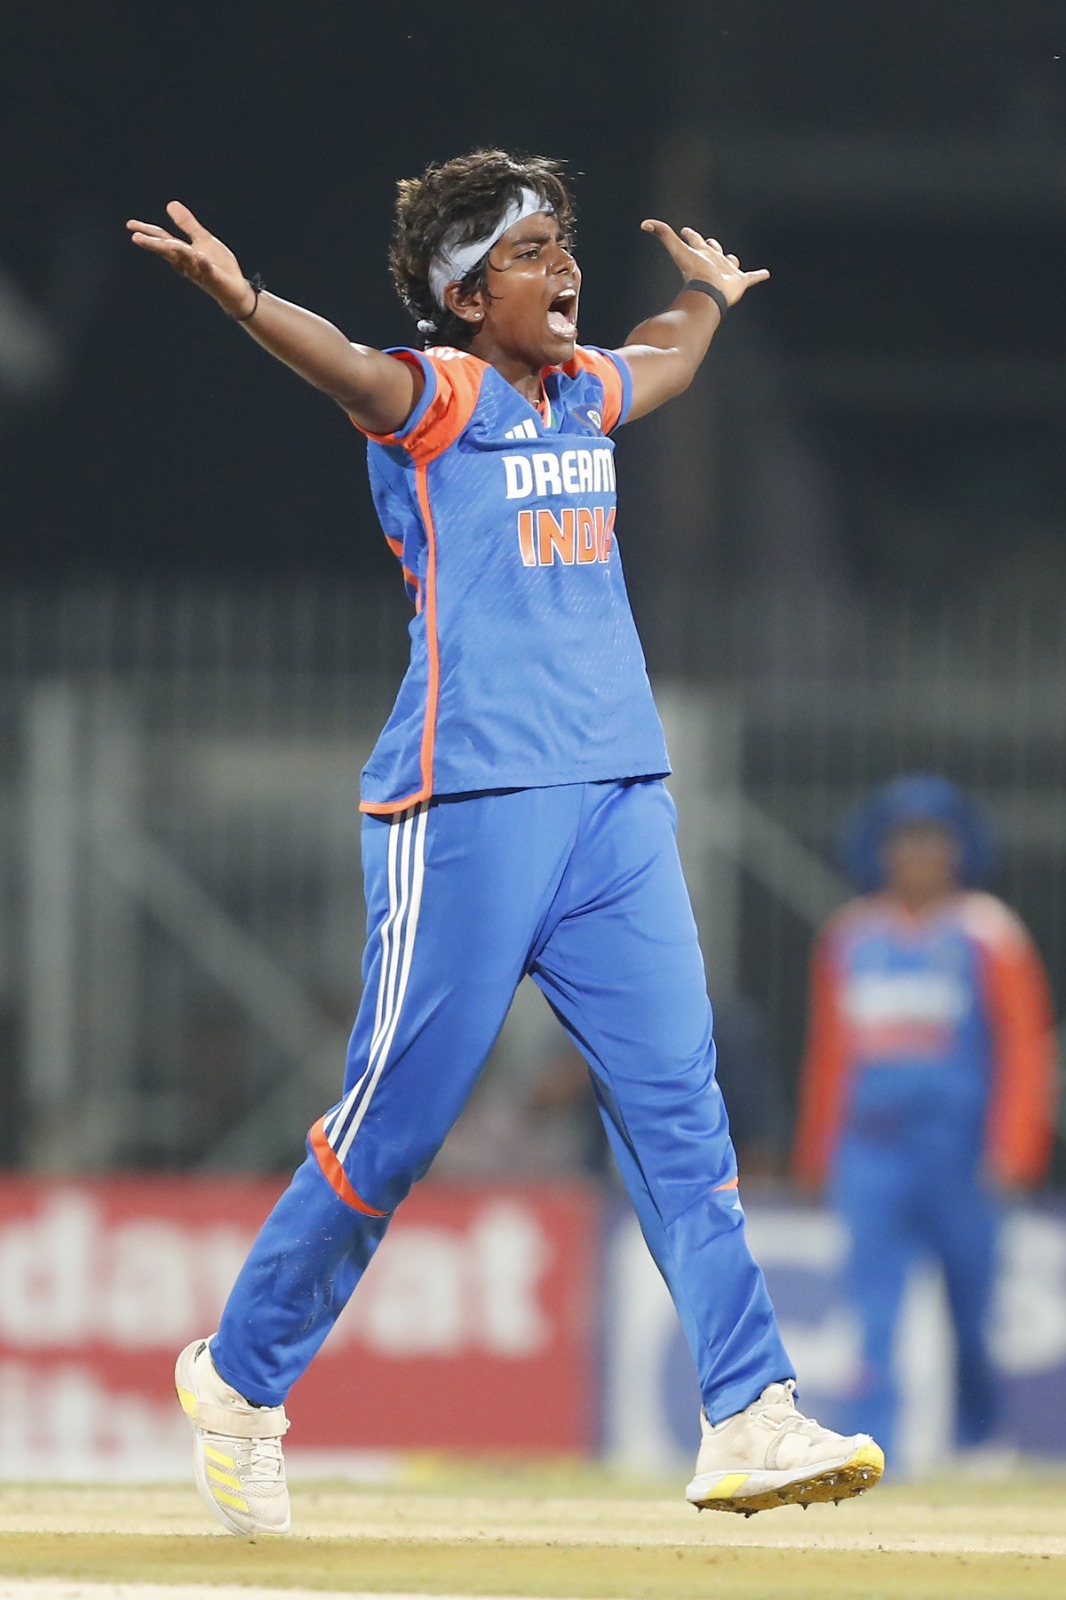 Arundhati Reddy celebrates a wicket during the 3rd T20I against South Africa in Chennai, on Tuesday